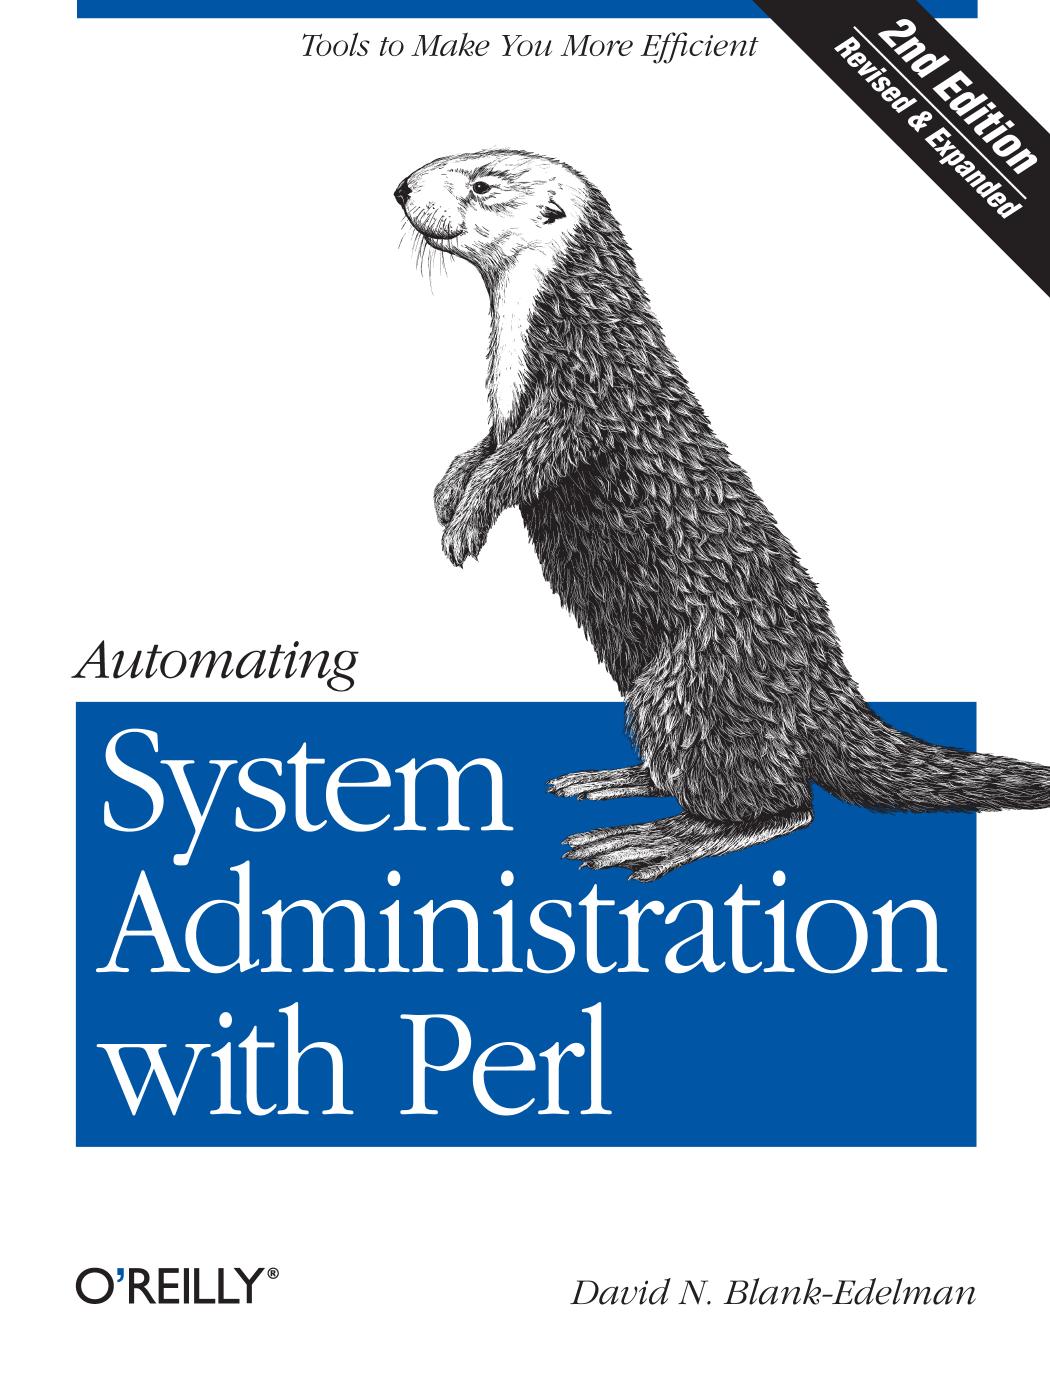 Automating System Administration with Perl by David N. Blank-Edelman